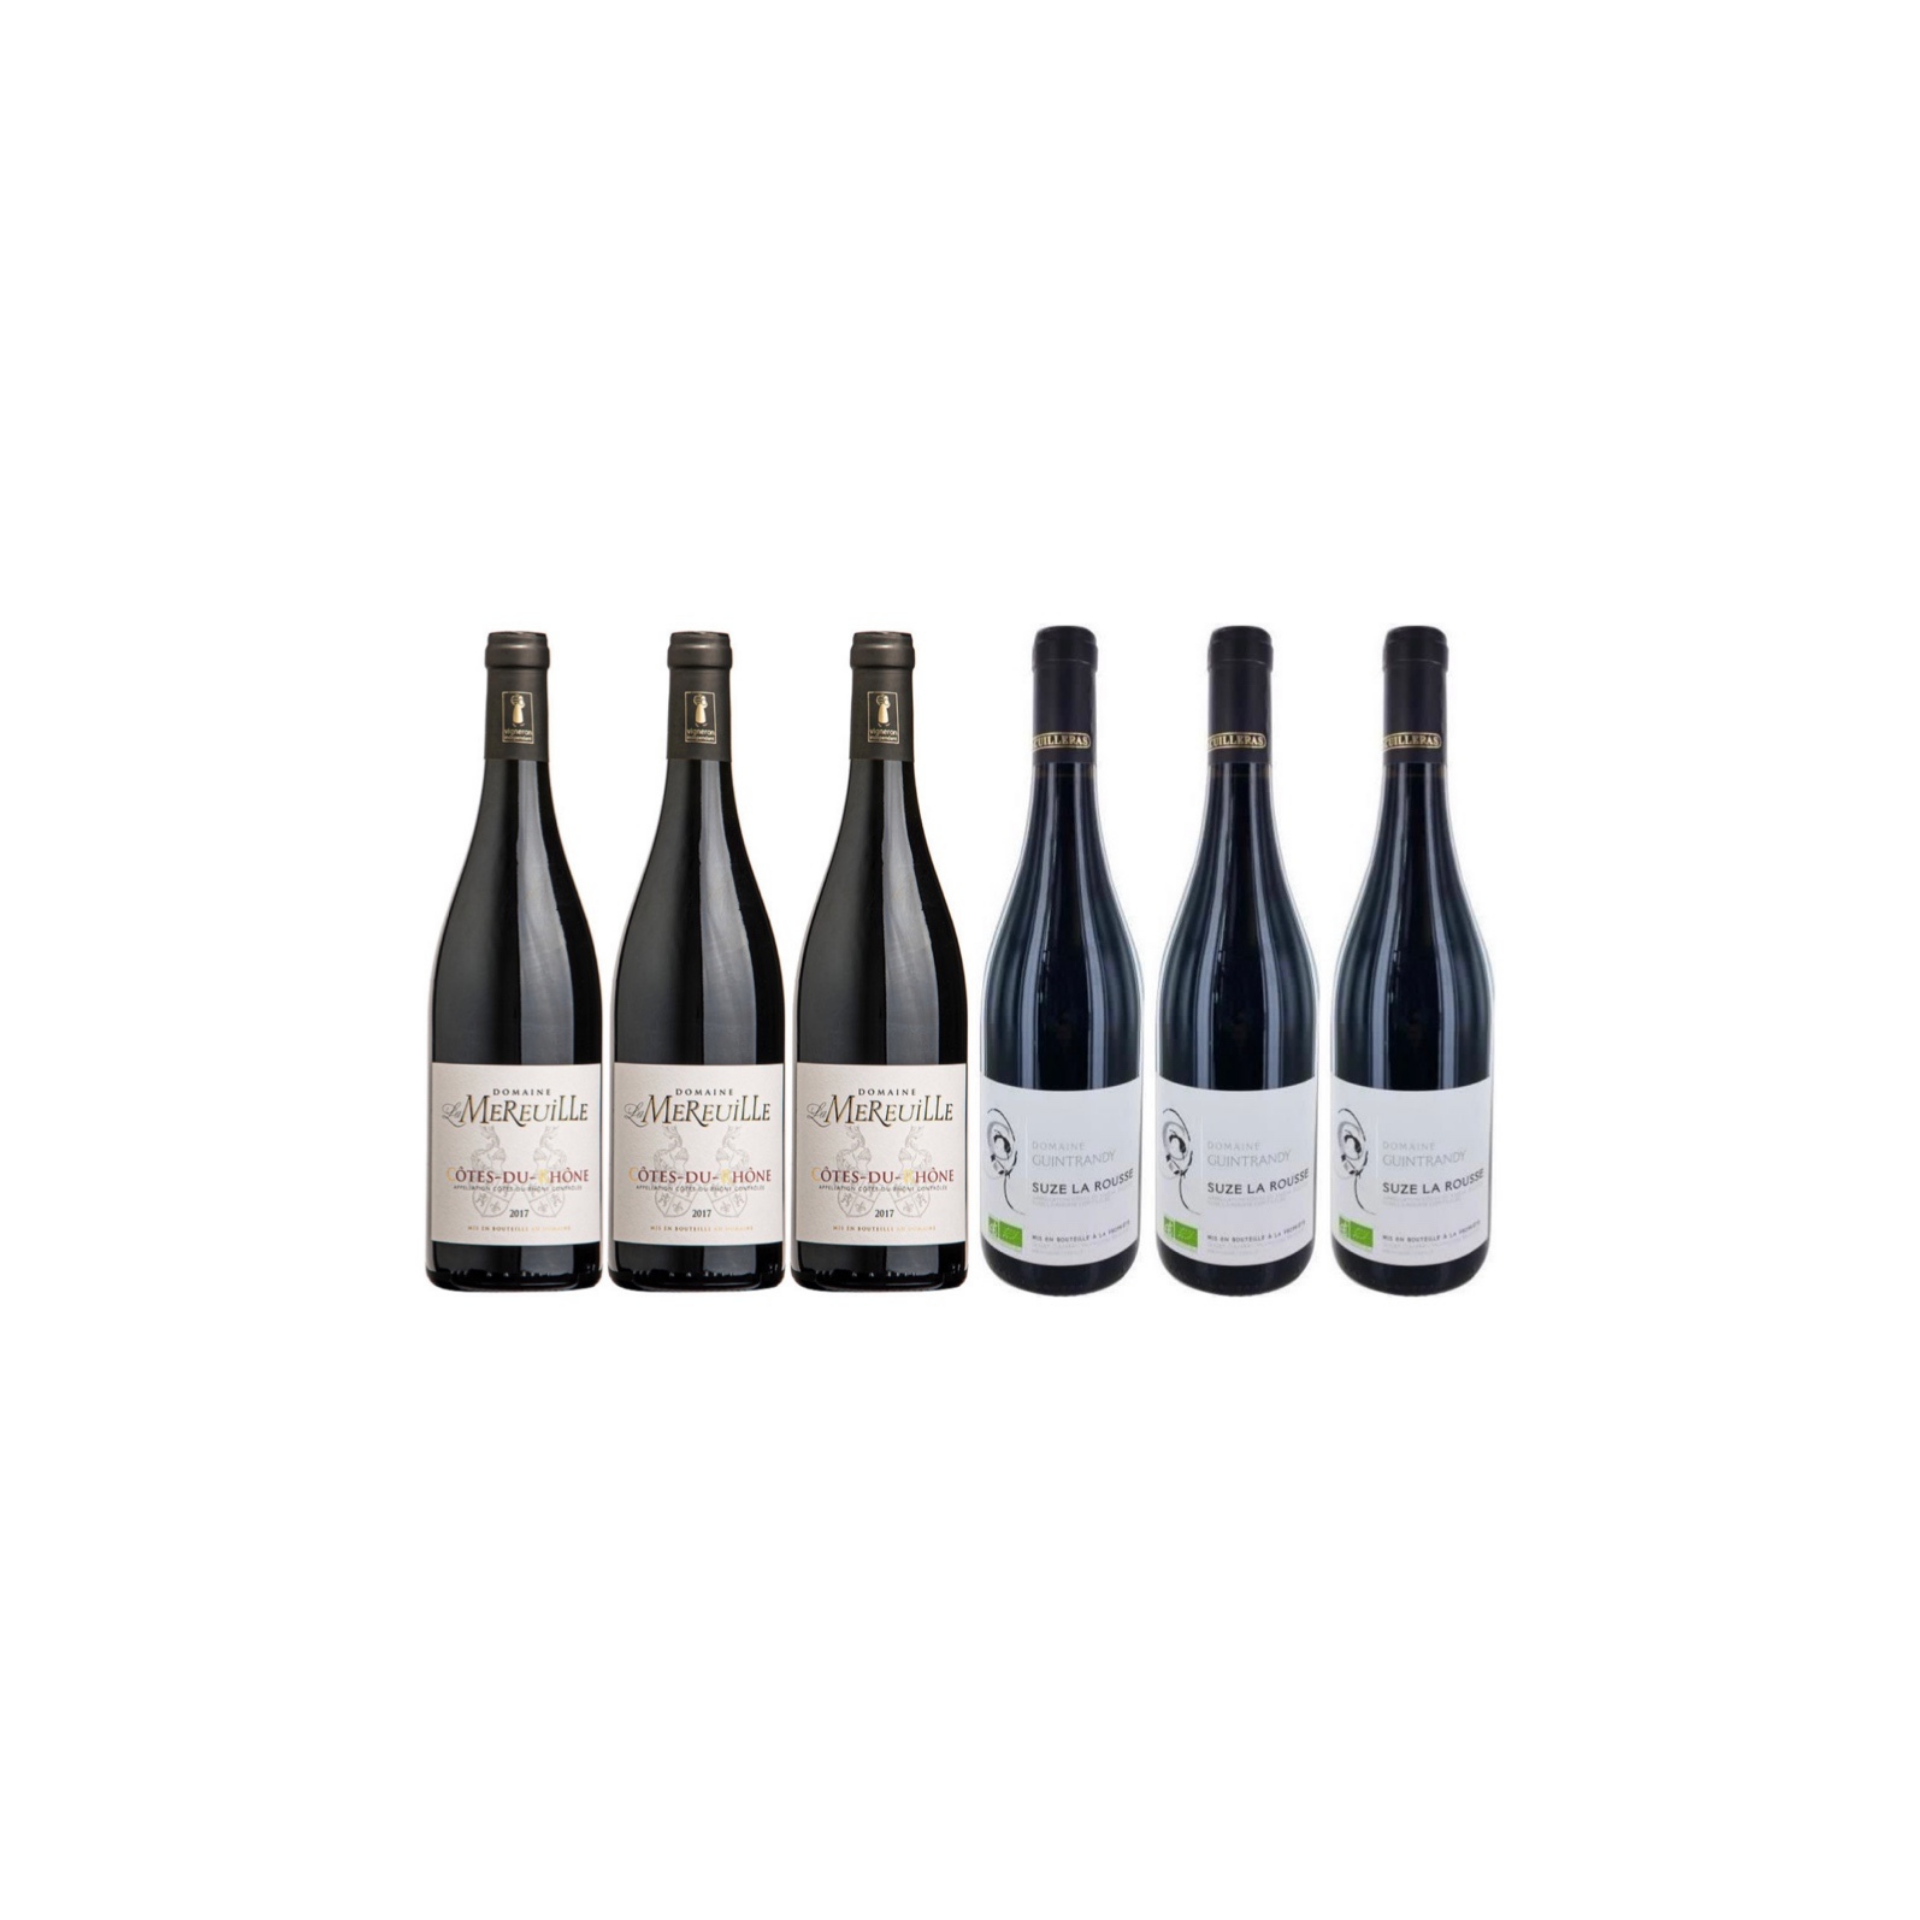 6 Award Winning Cotes Du Rhone Rouge and Village Suze la Rousse From Mereuille at only $180